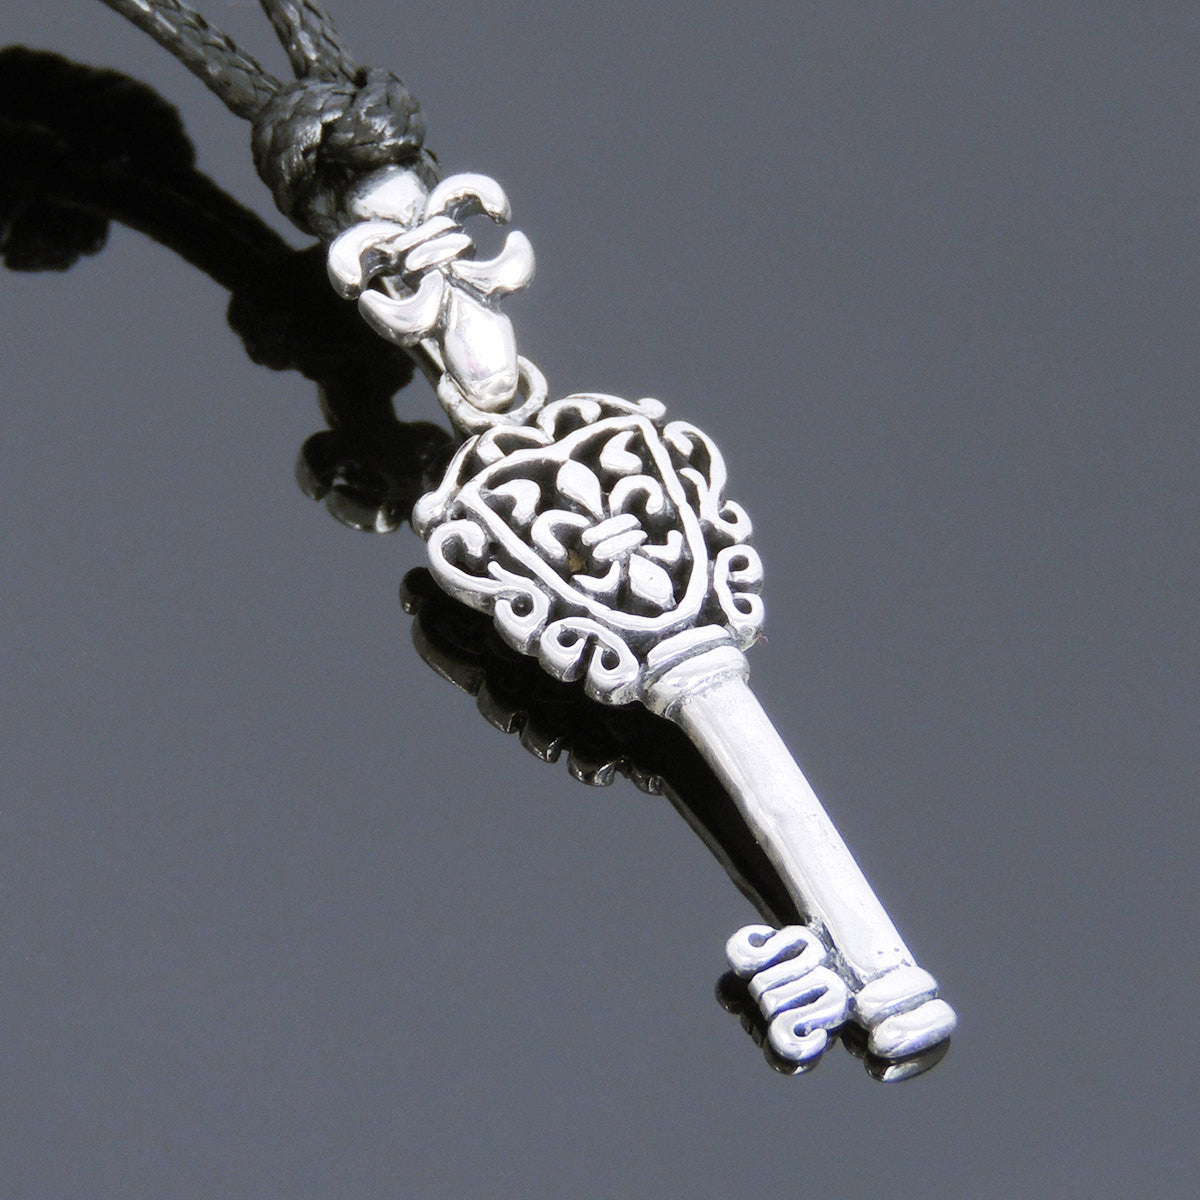 Adjustable Wax Rope Necklace with S925 Sterling Silver Fleur de Lis Coat of Arms Key Pendant - Handmade by Gem & Silver NK121